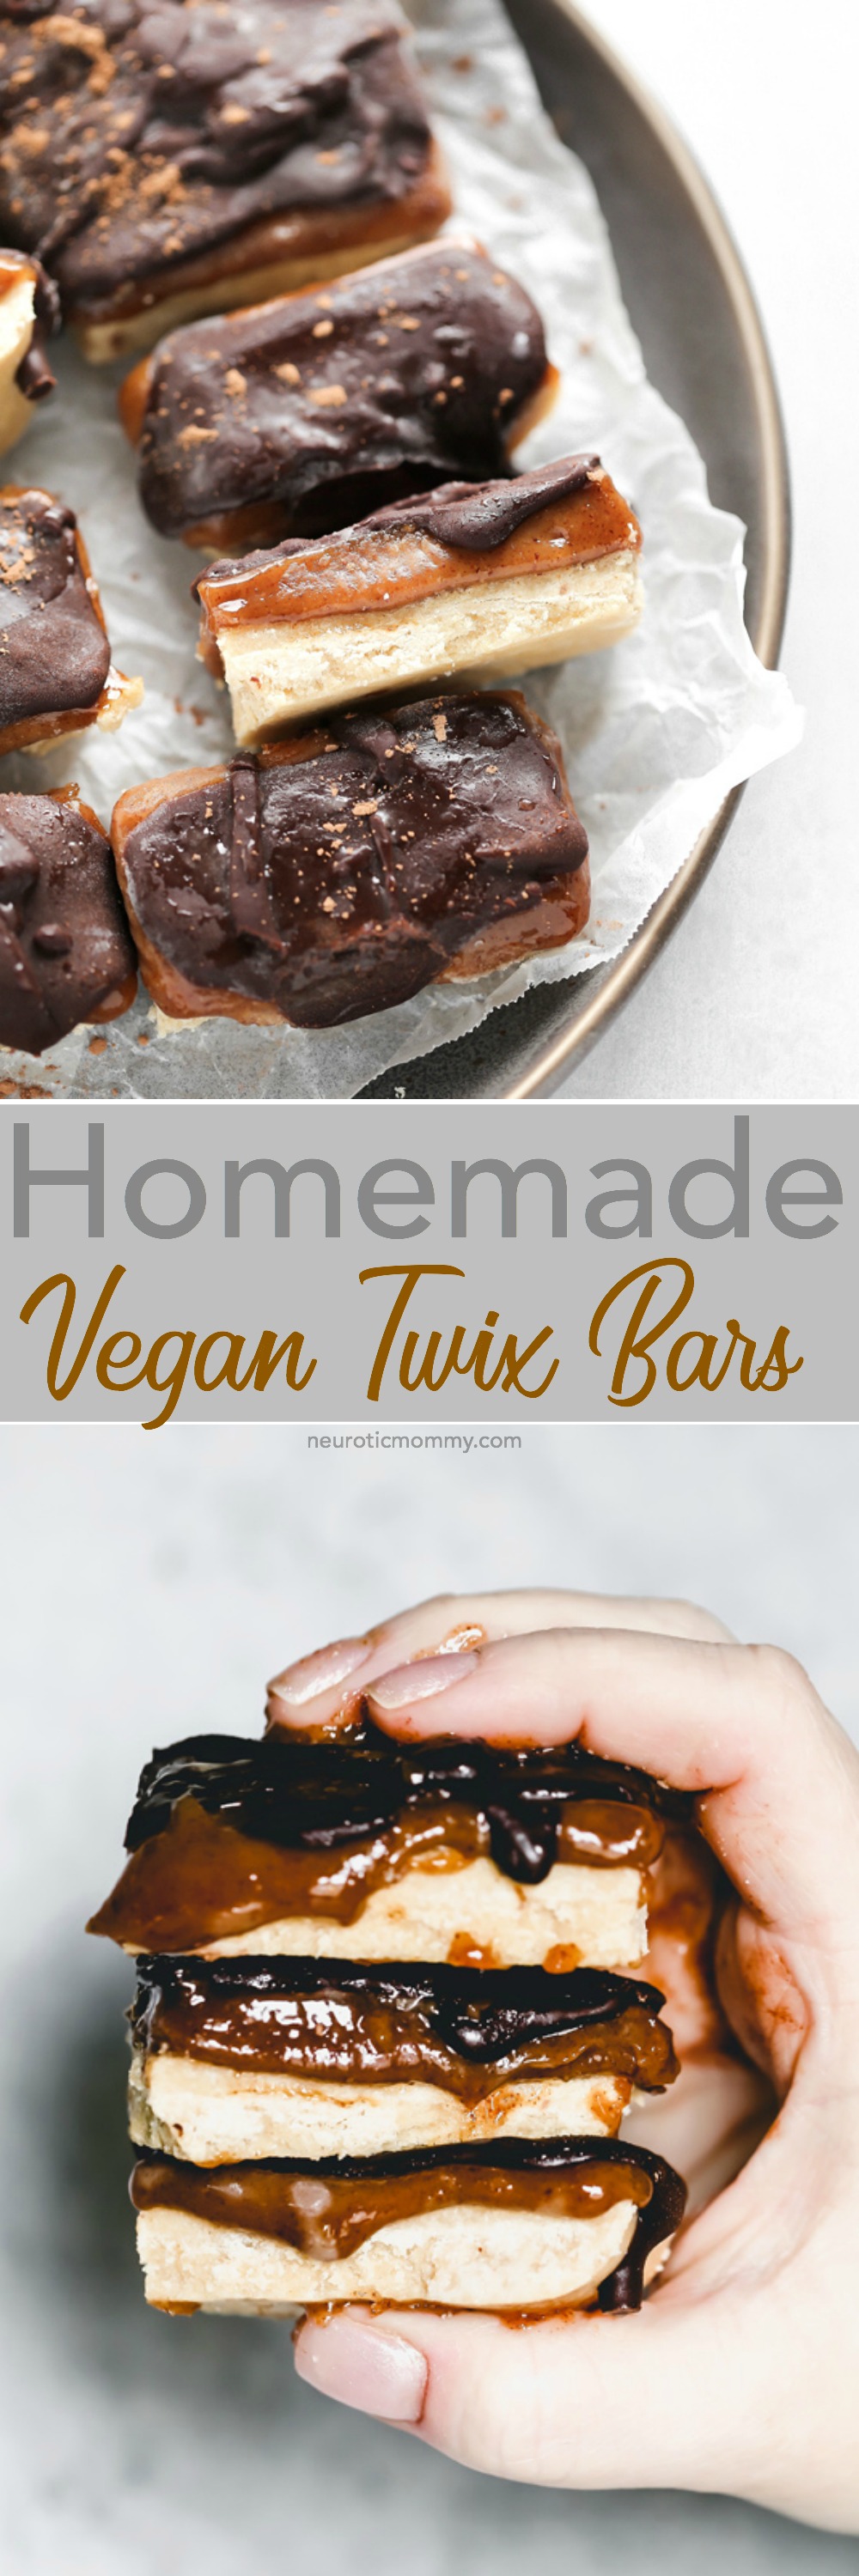 Homemade Vegan Twix Bars - A traditional shortbread crust layered with gooey caramel filling and a sweet dark chocolate topping. A delicious vegan remake to a classic recipe. NeuroticMommy.com #vegantwix